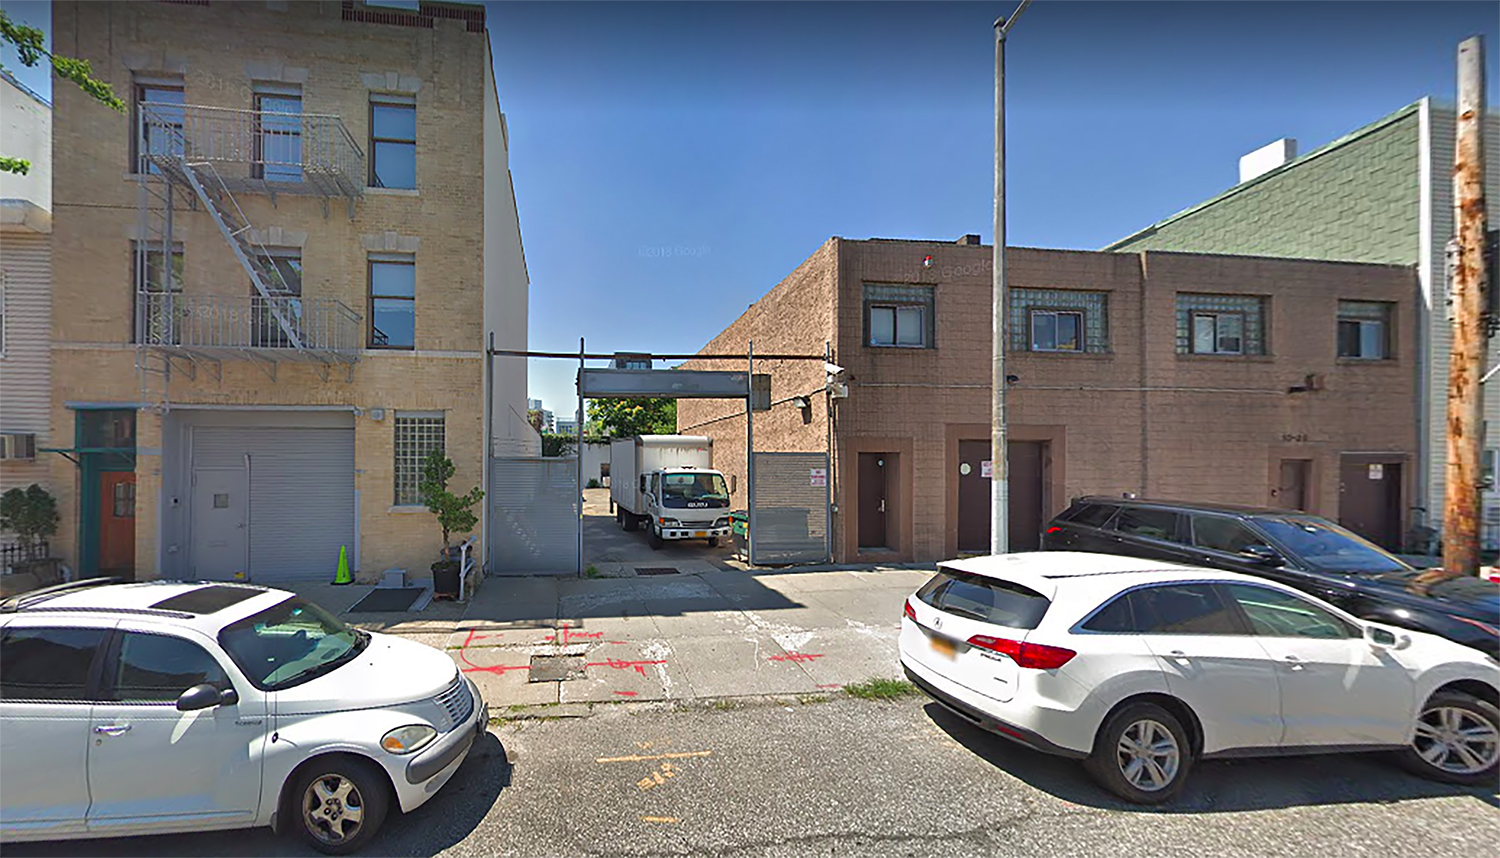 10-32 47th Avenue in Long Island City, Queens